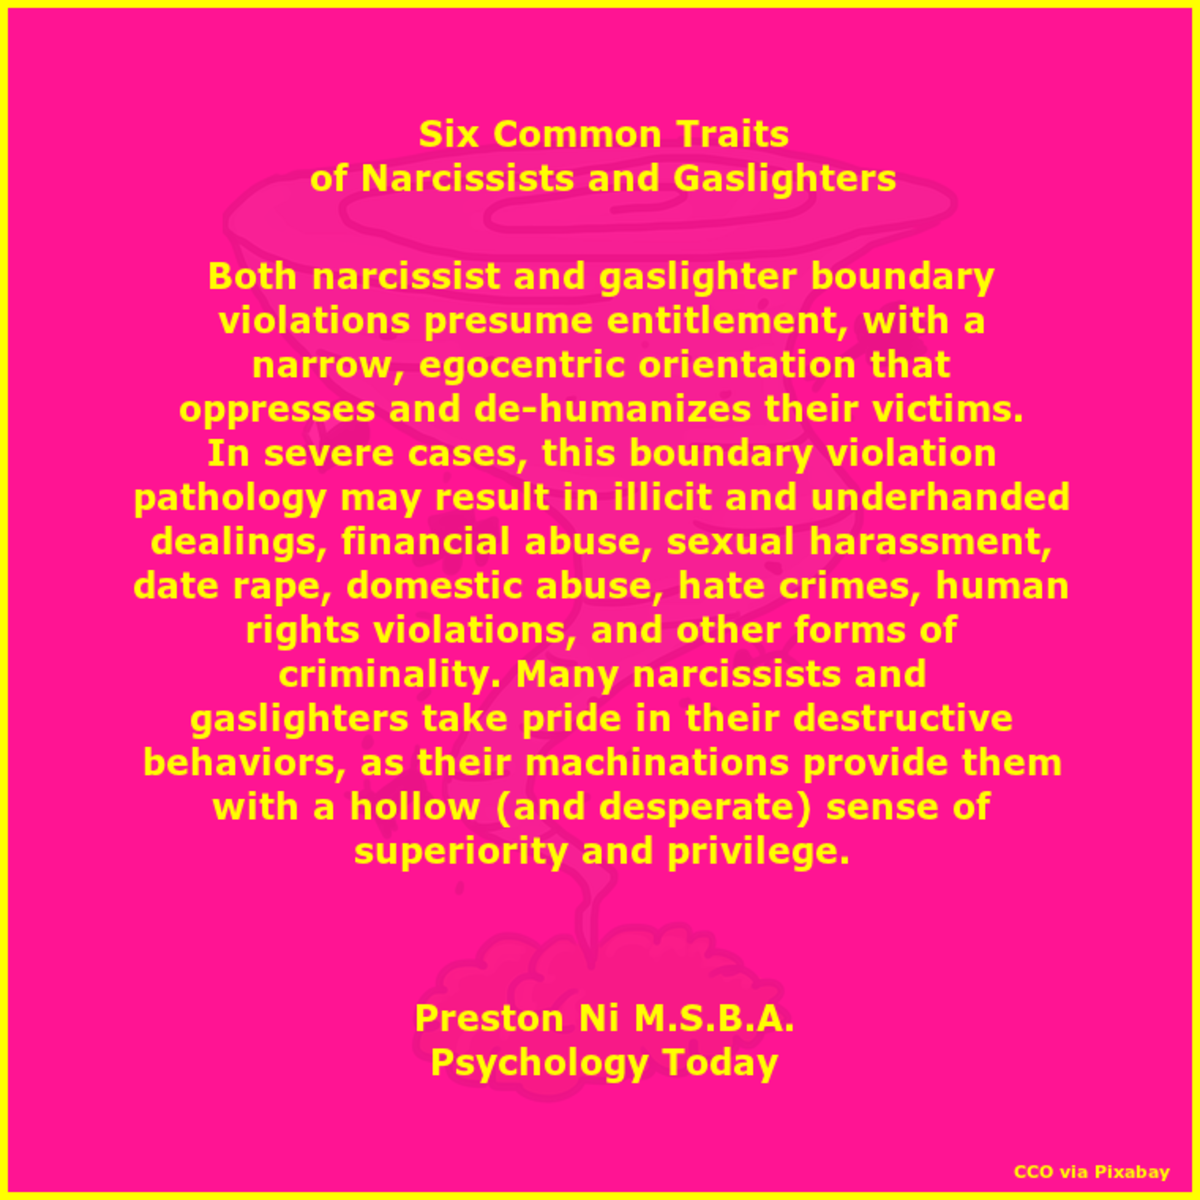 Six Common Traits of Narcissists and Gaslighters Quote by Preston Ni, M.S.B.A., Psychology Today